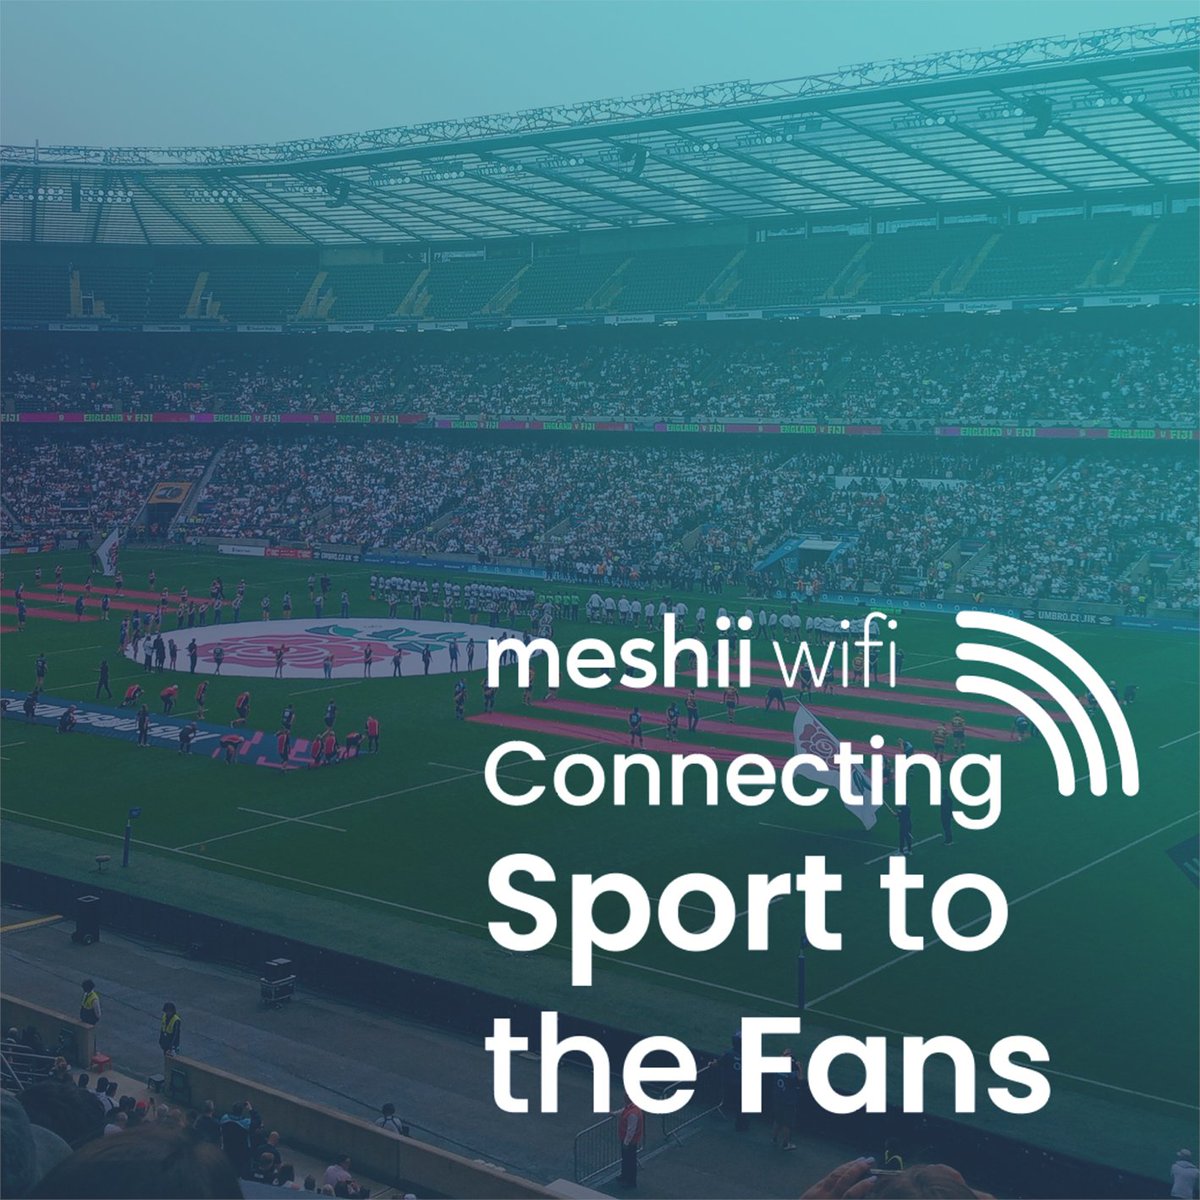 With #meshiiwifi, #stadiums and venues can offer their visitors access to high-speed #wifi on #game days. On non-game days, they can offer low-cost #connectivity to their #community to help bridge the #digitaldivide in their local area. Find out more at meshii.co